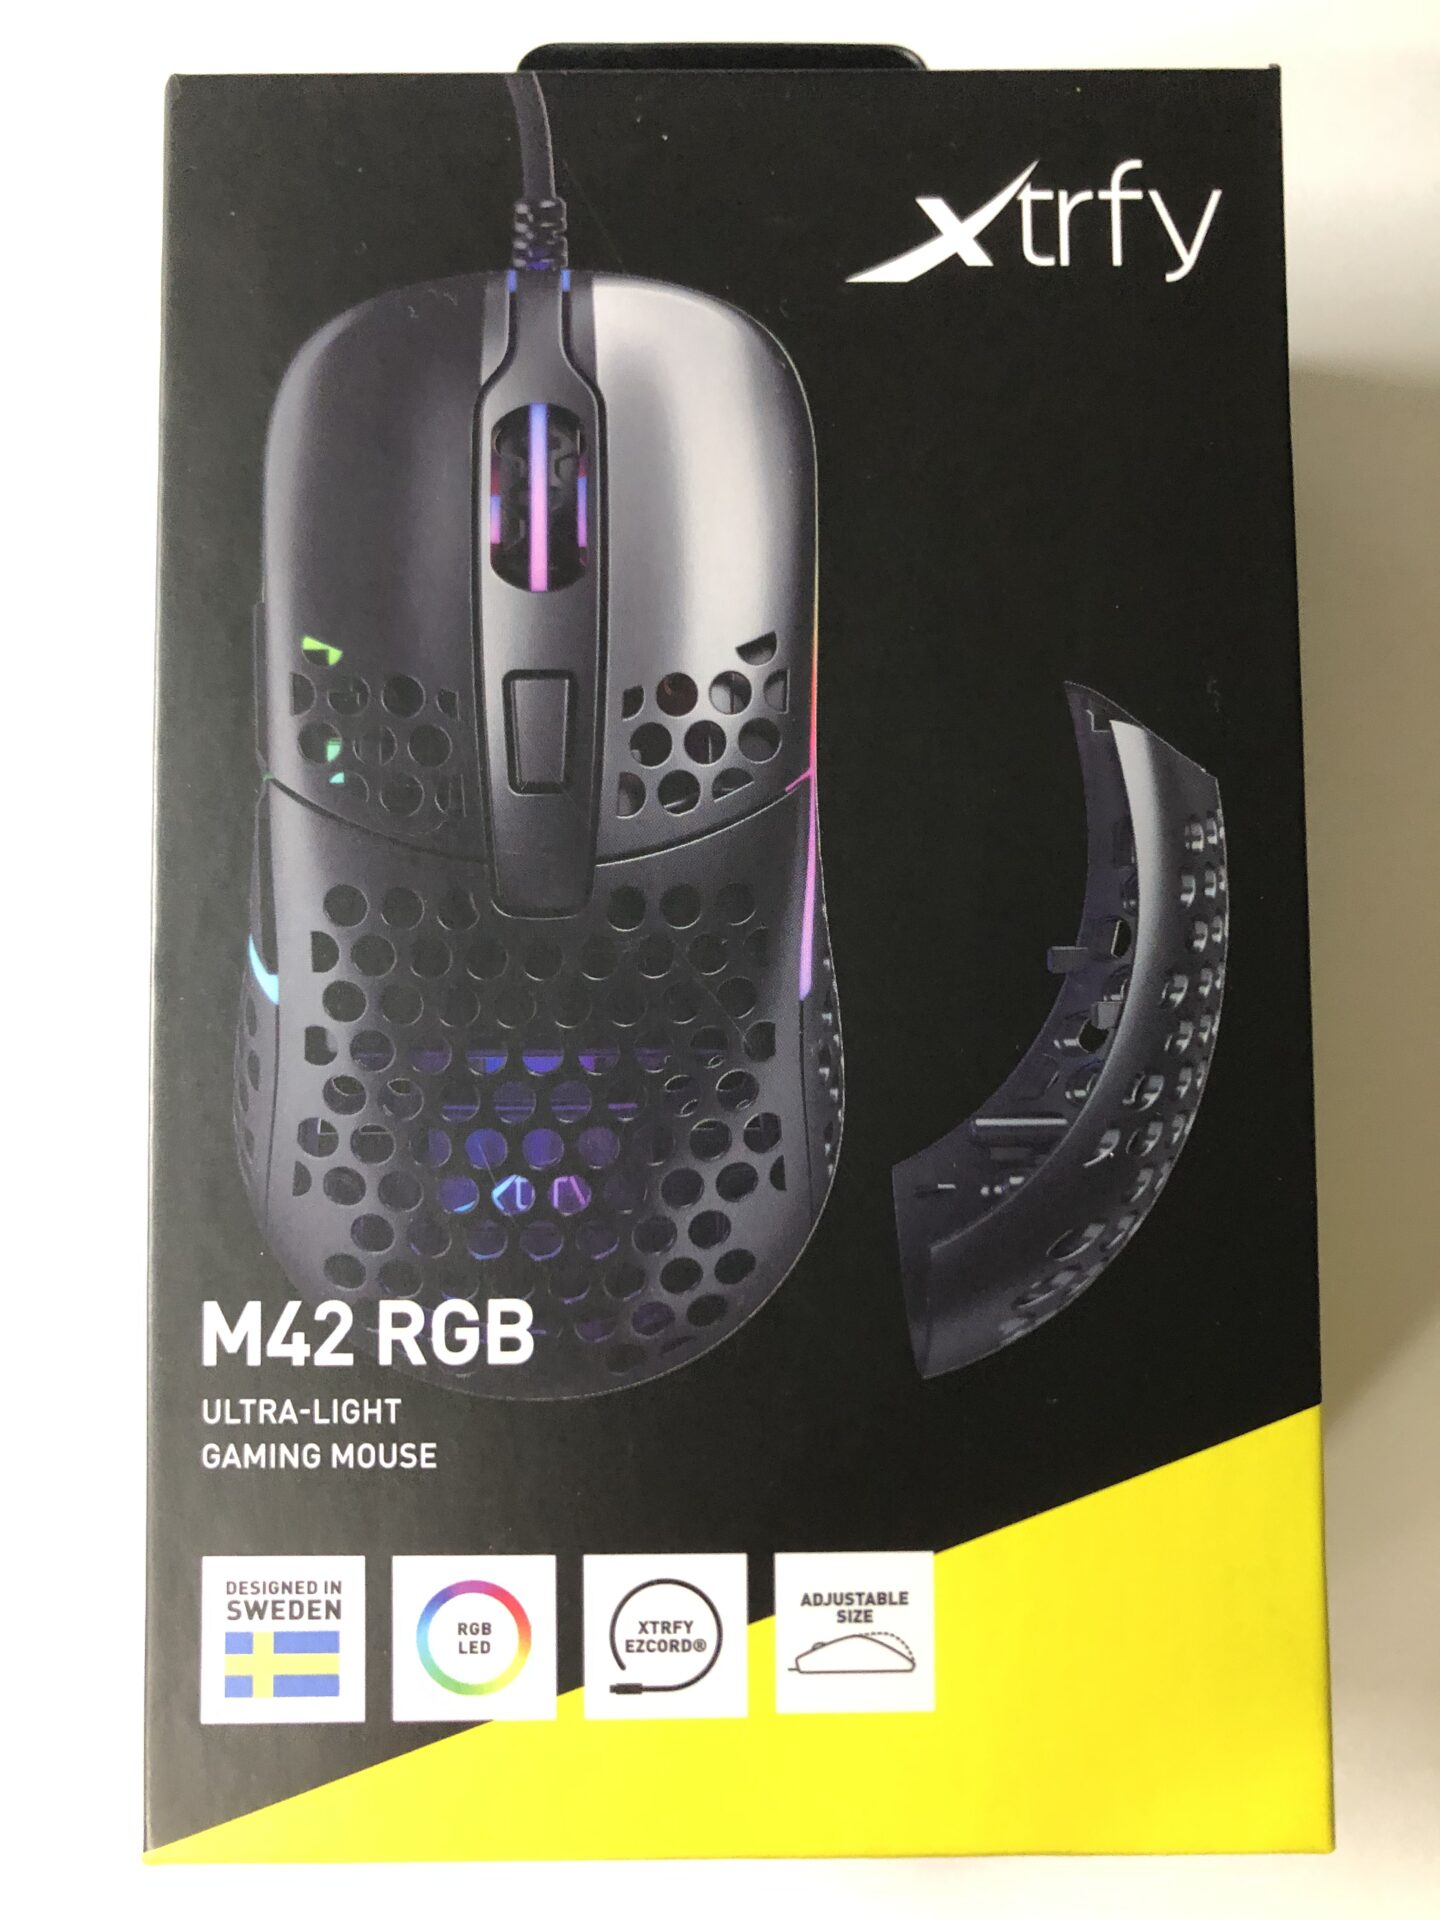 Xtrfy M42 package